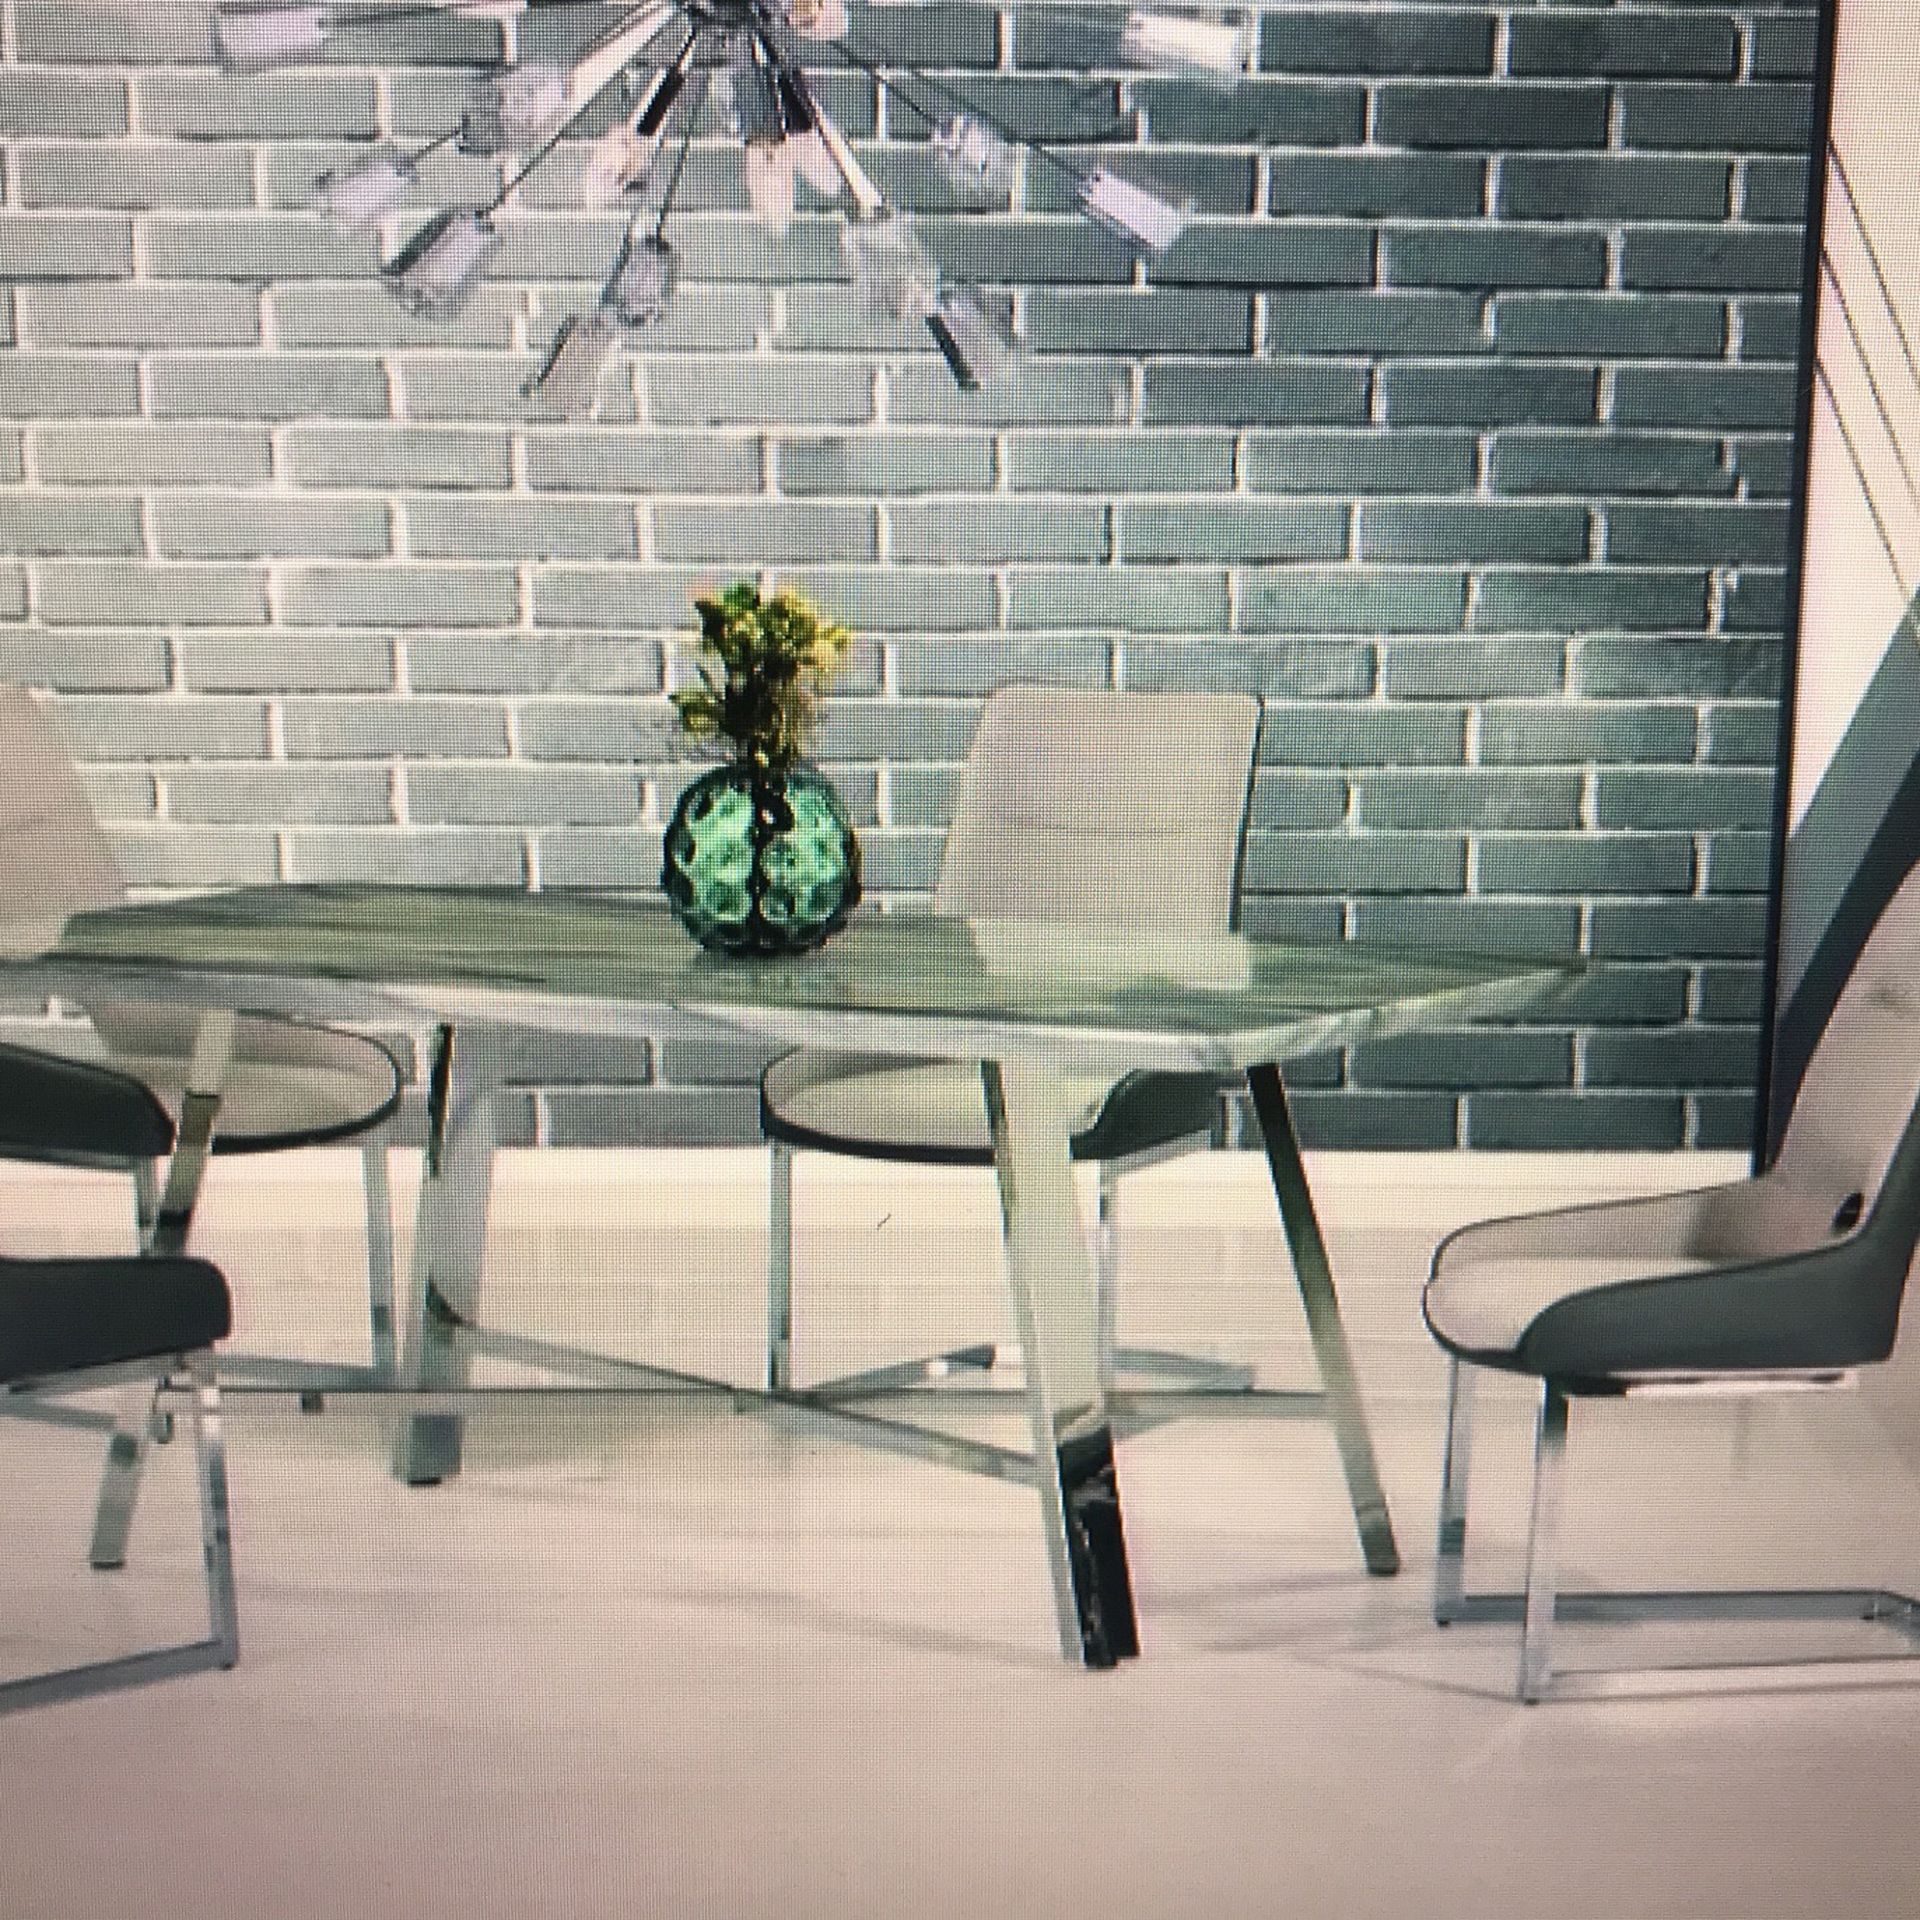 SALE $1150 DINING ROOM SET MARBLE CHROME TABLE + 4 CHAIRS